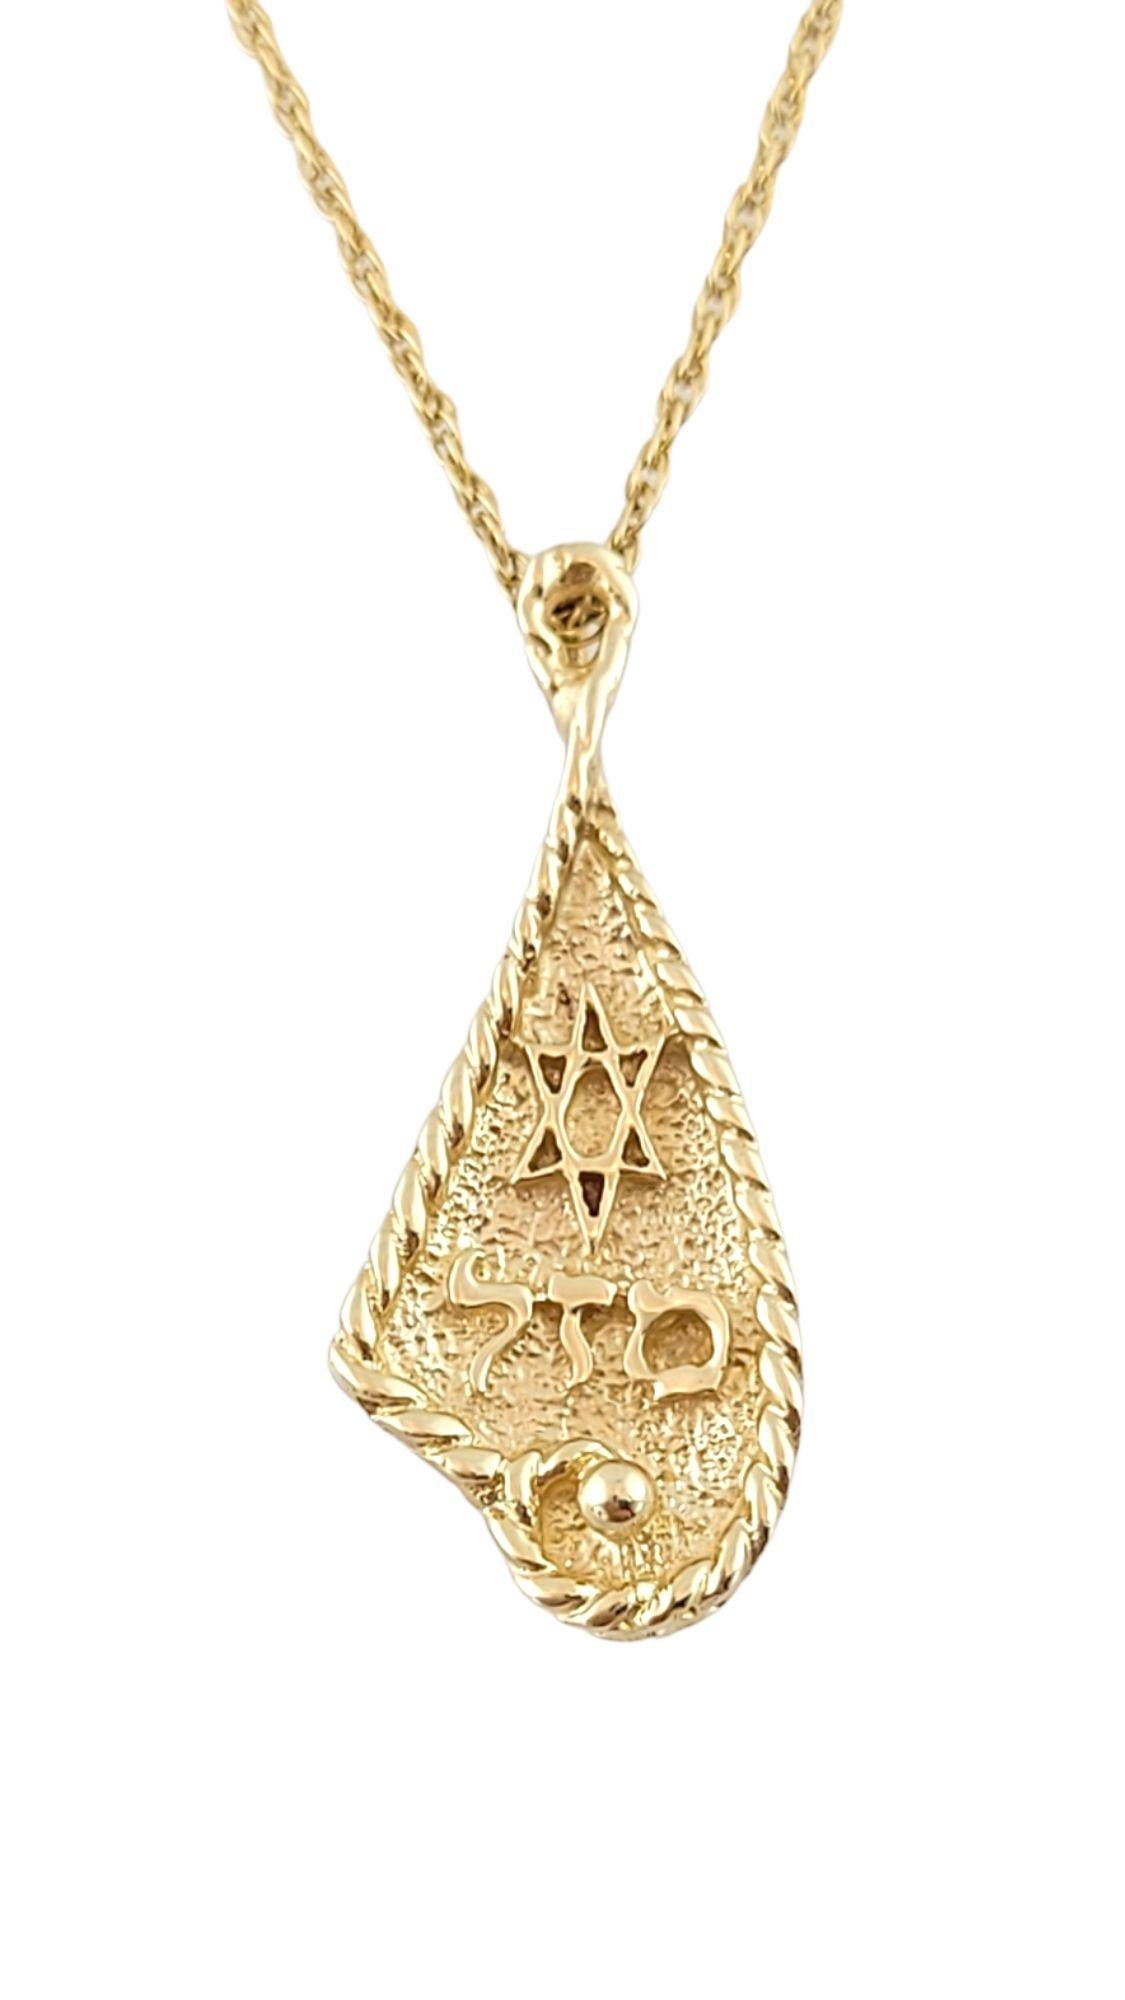 This gorgeous 14K gold Hebrew pendant is paired with a beautiful 14K yellow gold chain!

Chain length: 15 1/2